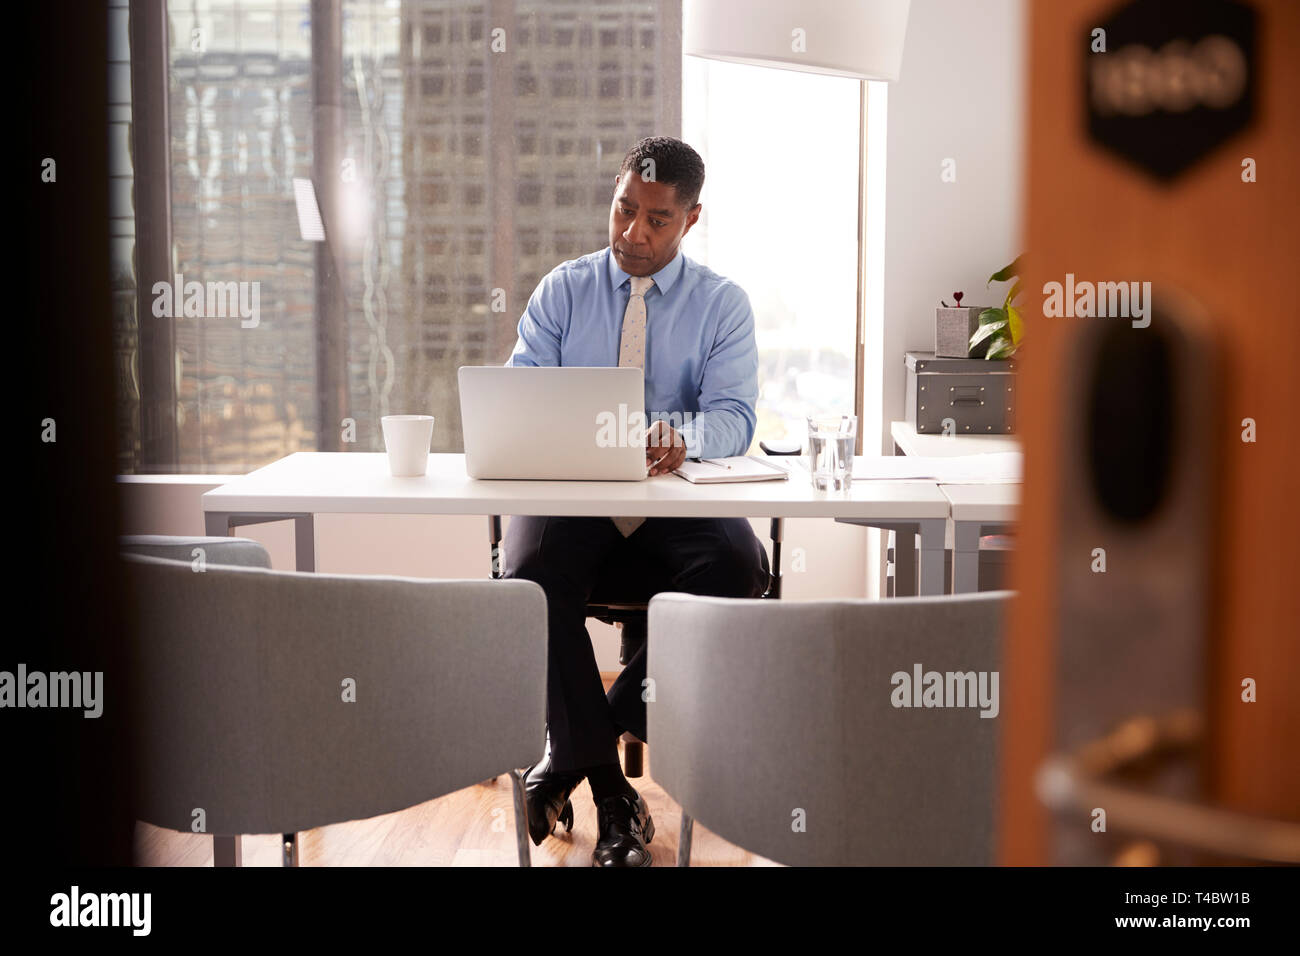 Male Financial Advisor In Modern Office Sitting At Desk Working On Laptop Stock Photo